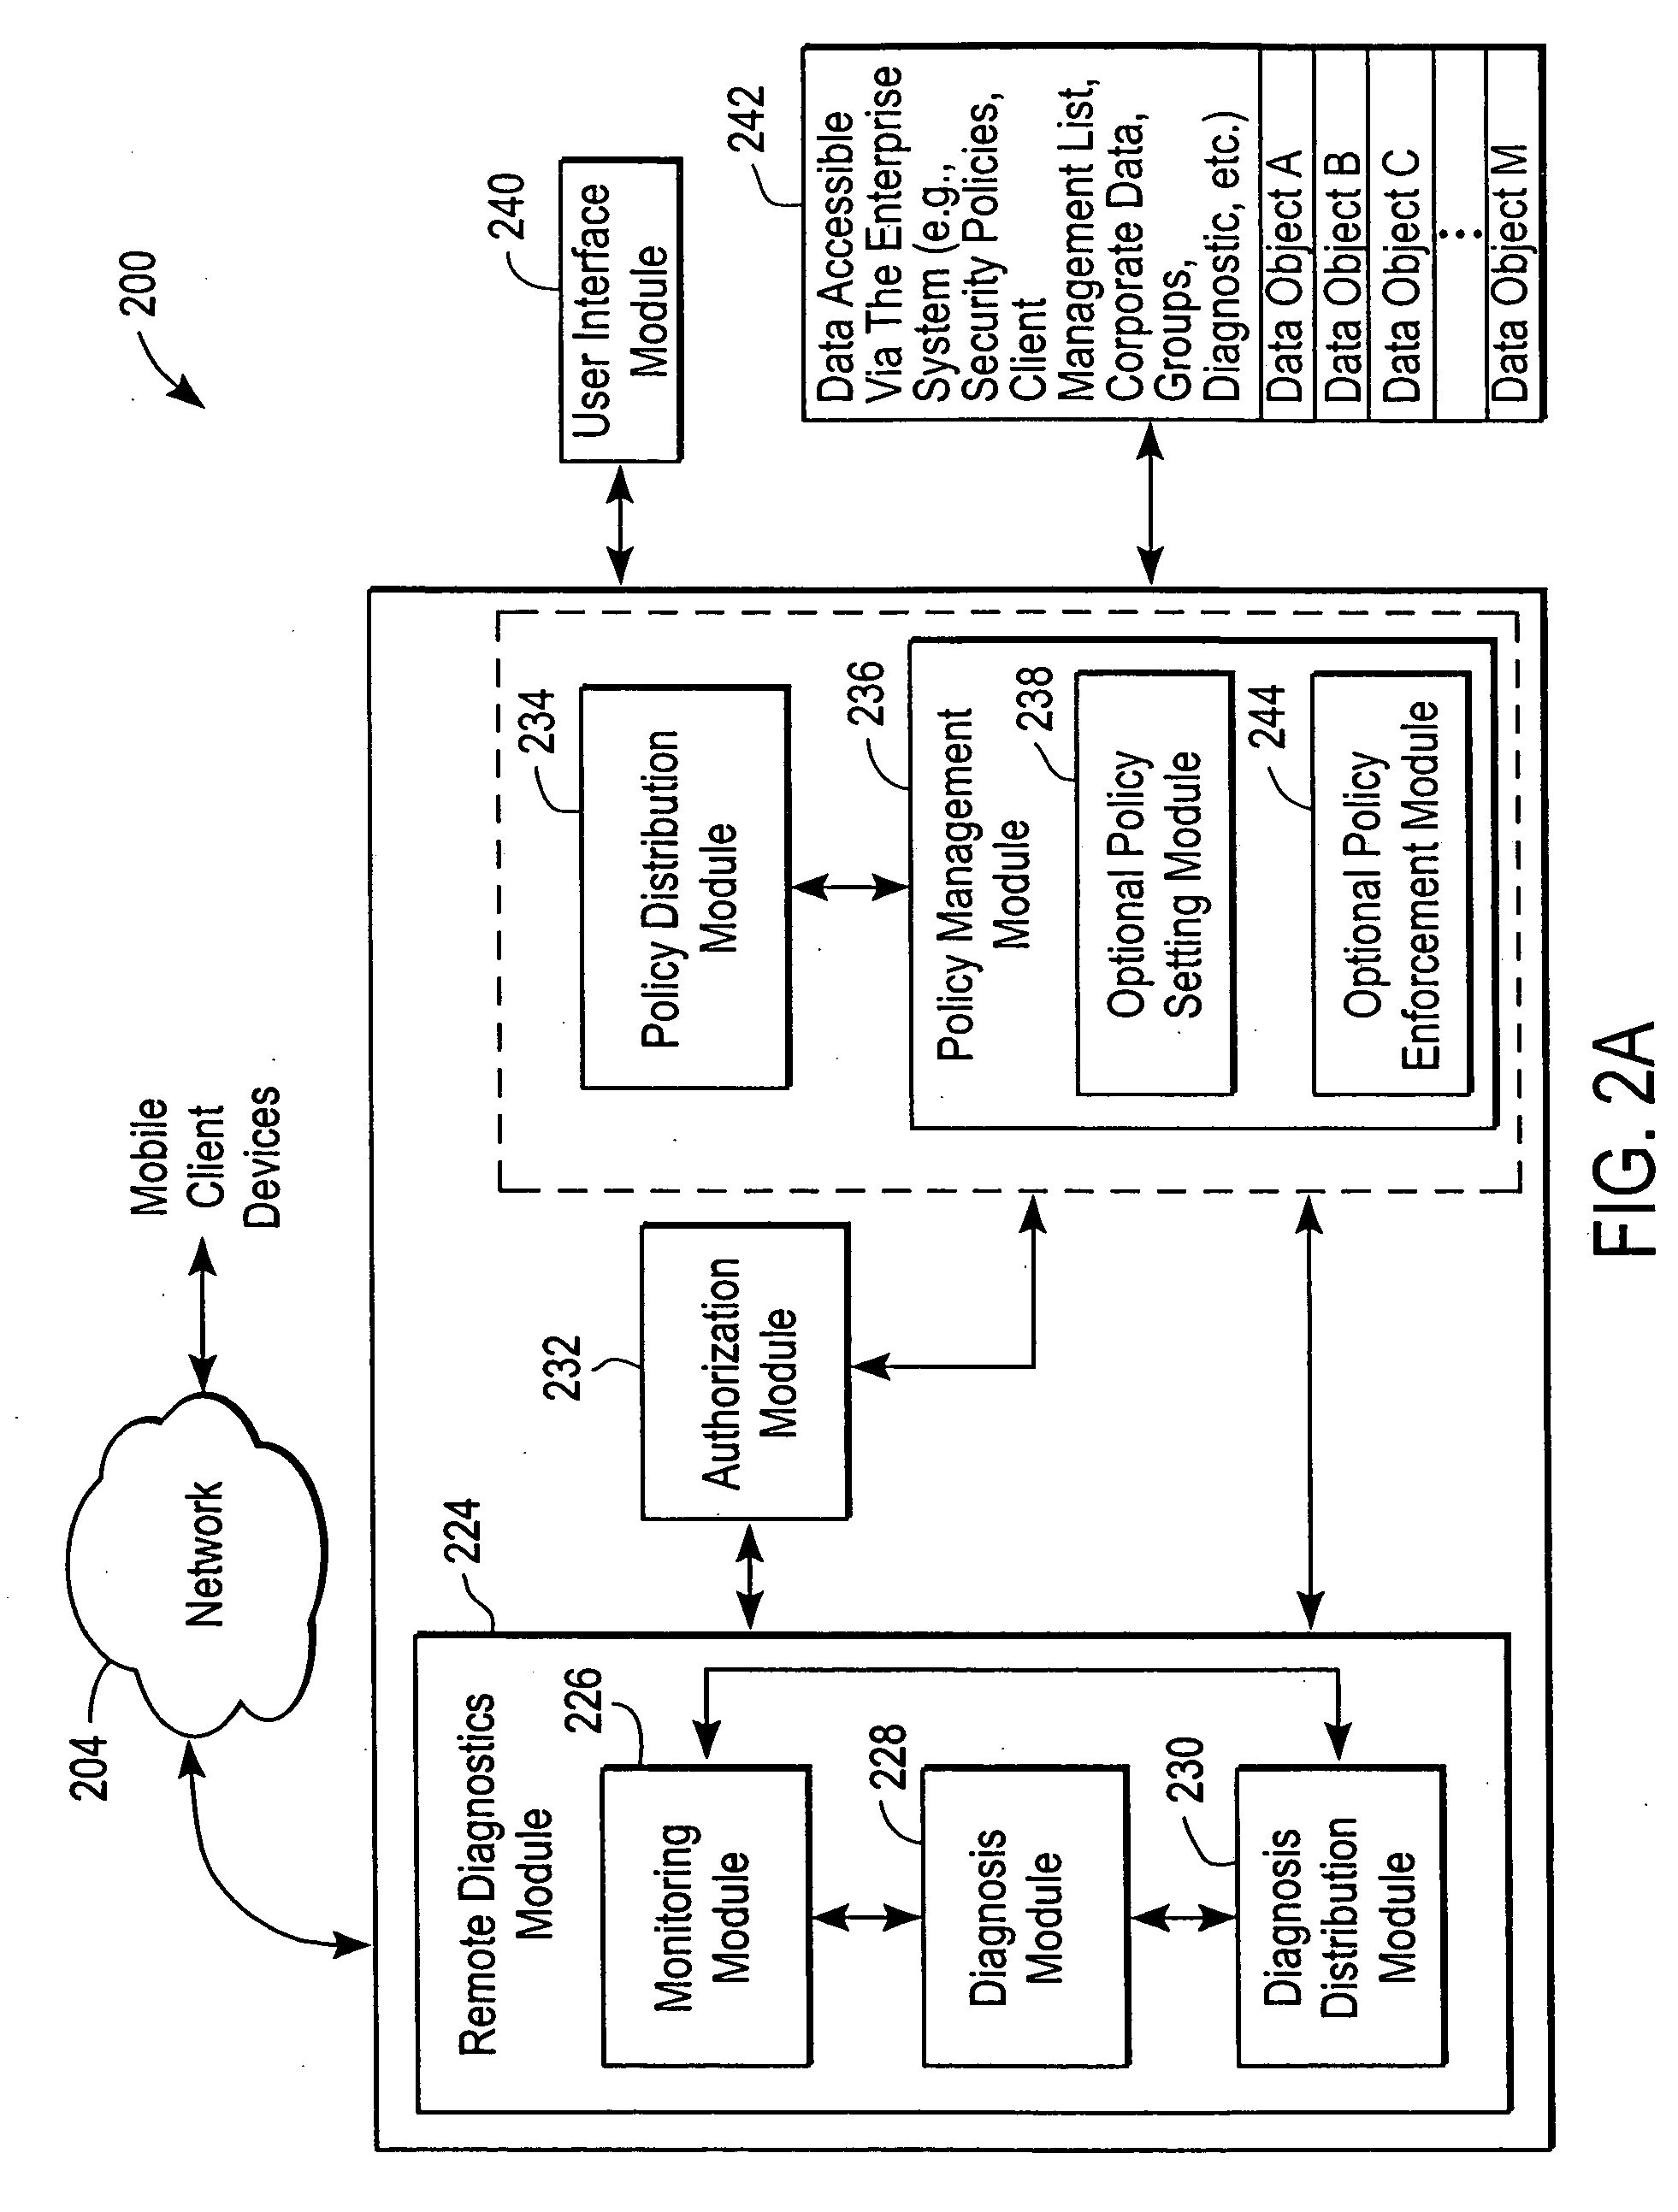 Administration of protection of data accessible by a mobile device